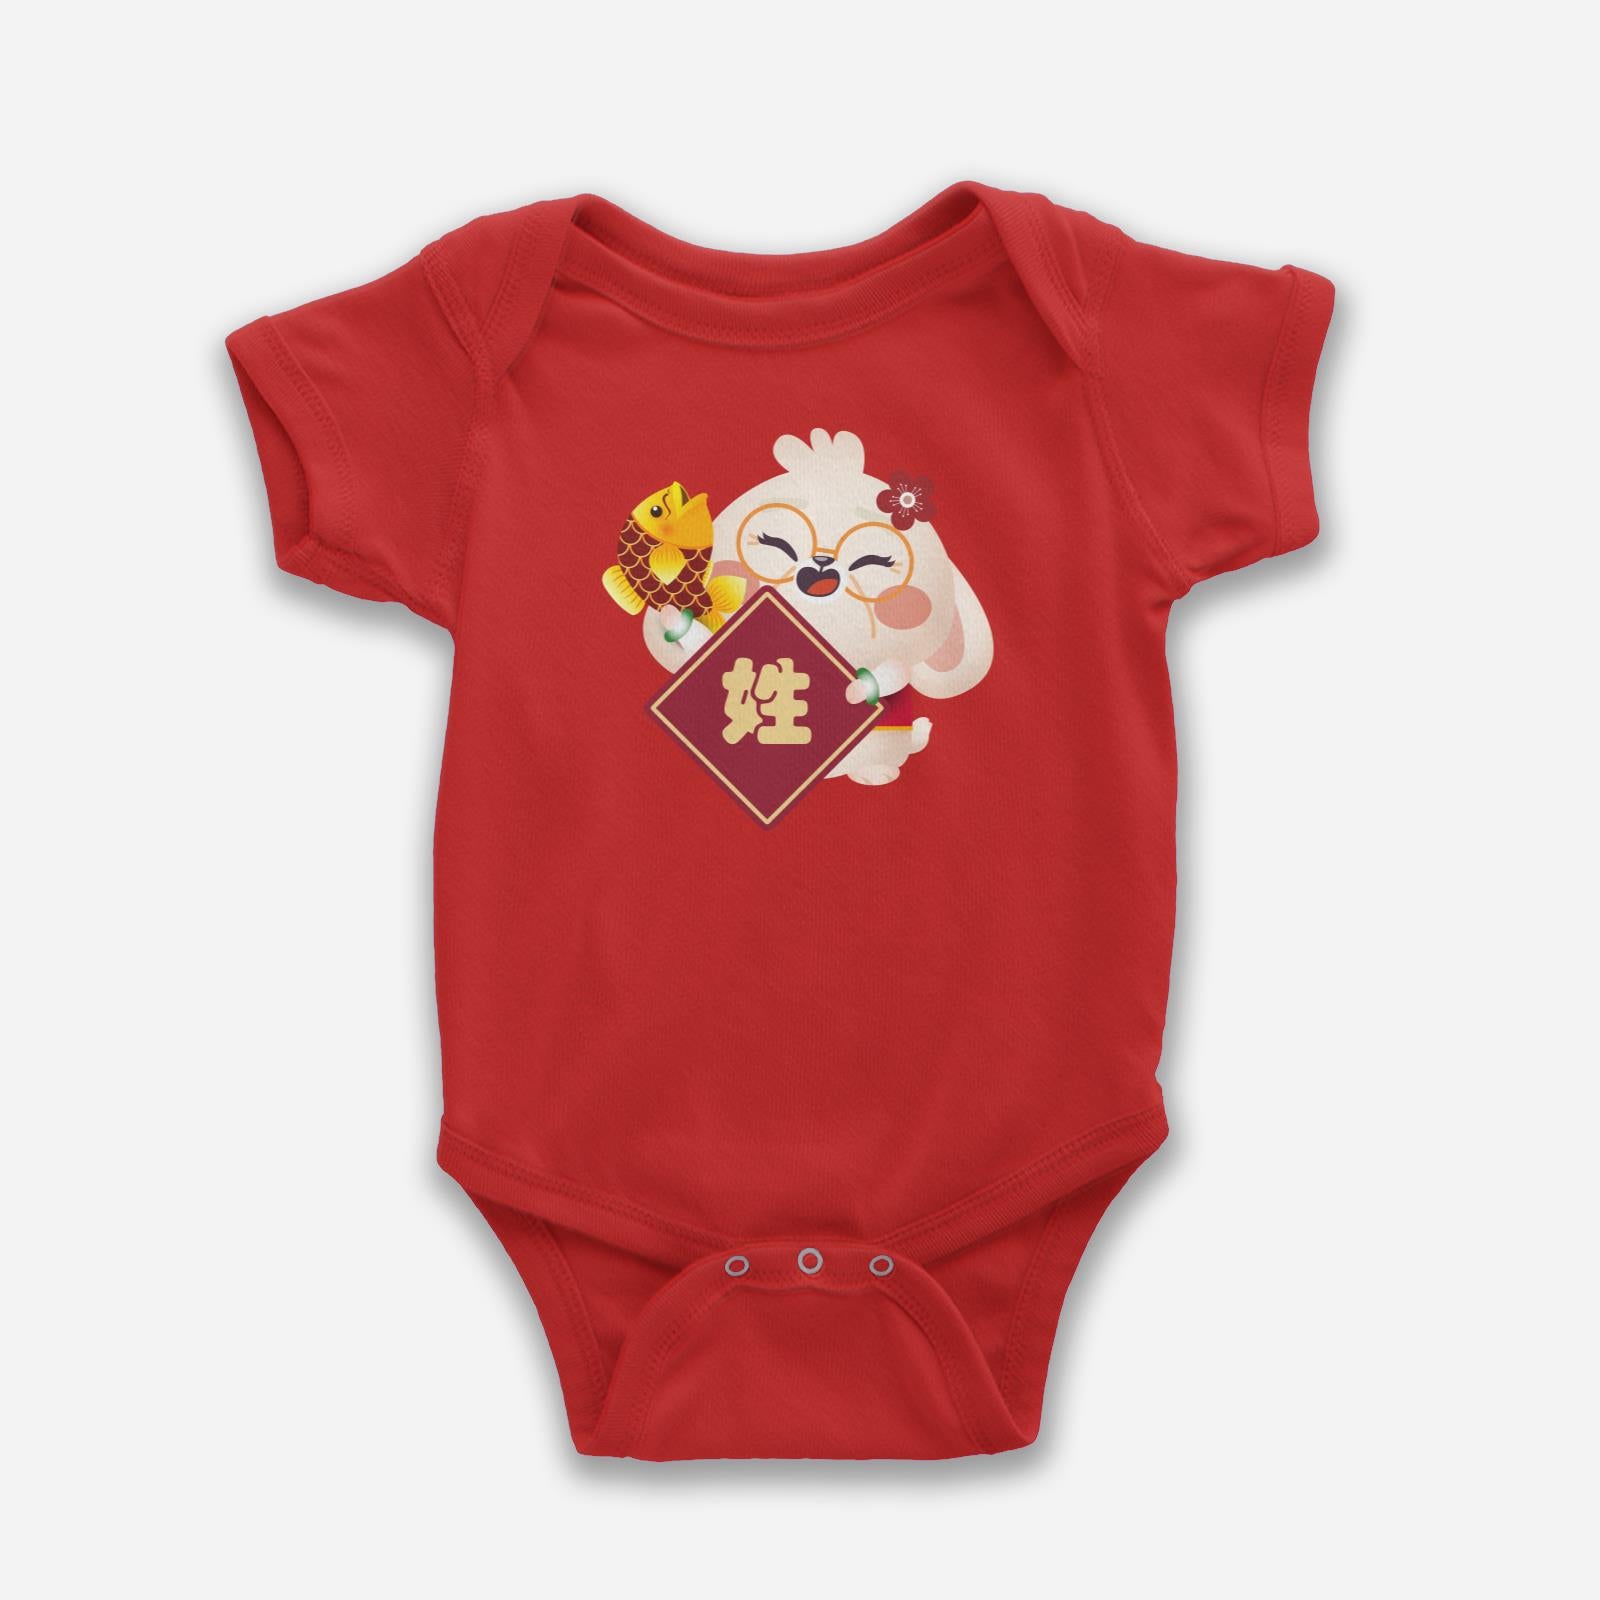 Cny Rabbit Family - Surname Grandma Rabbit Baby Romper with Chinese Surname